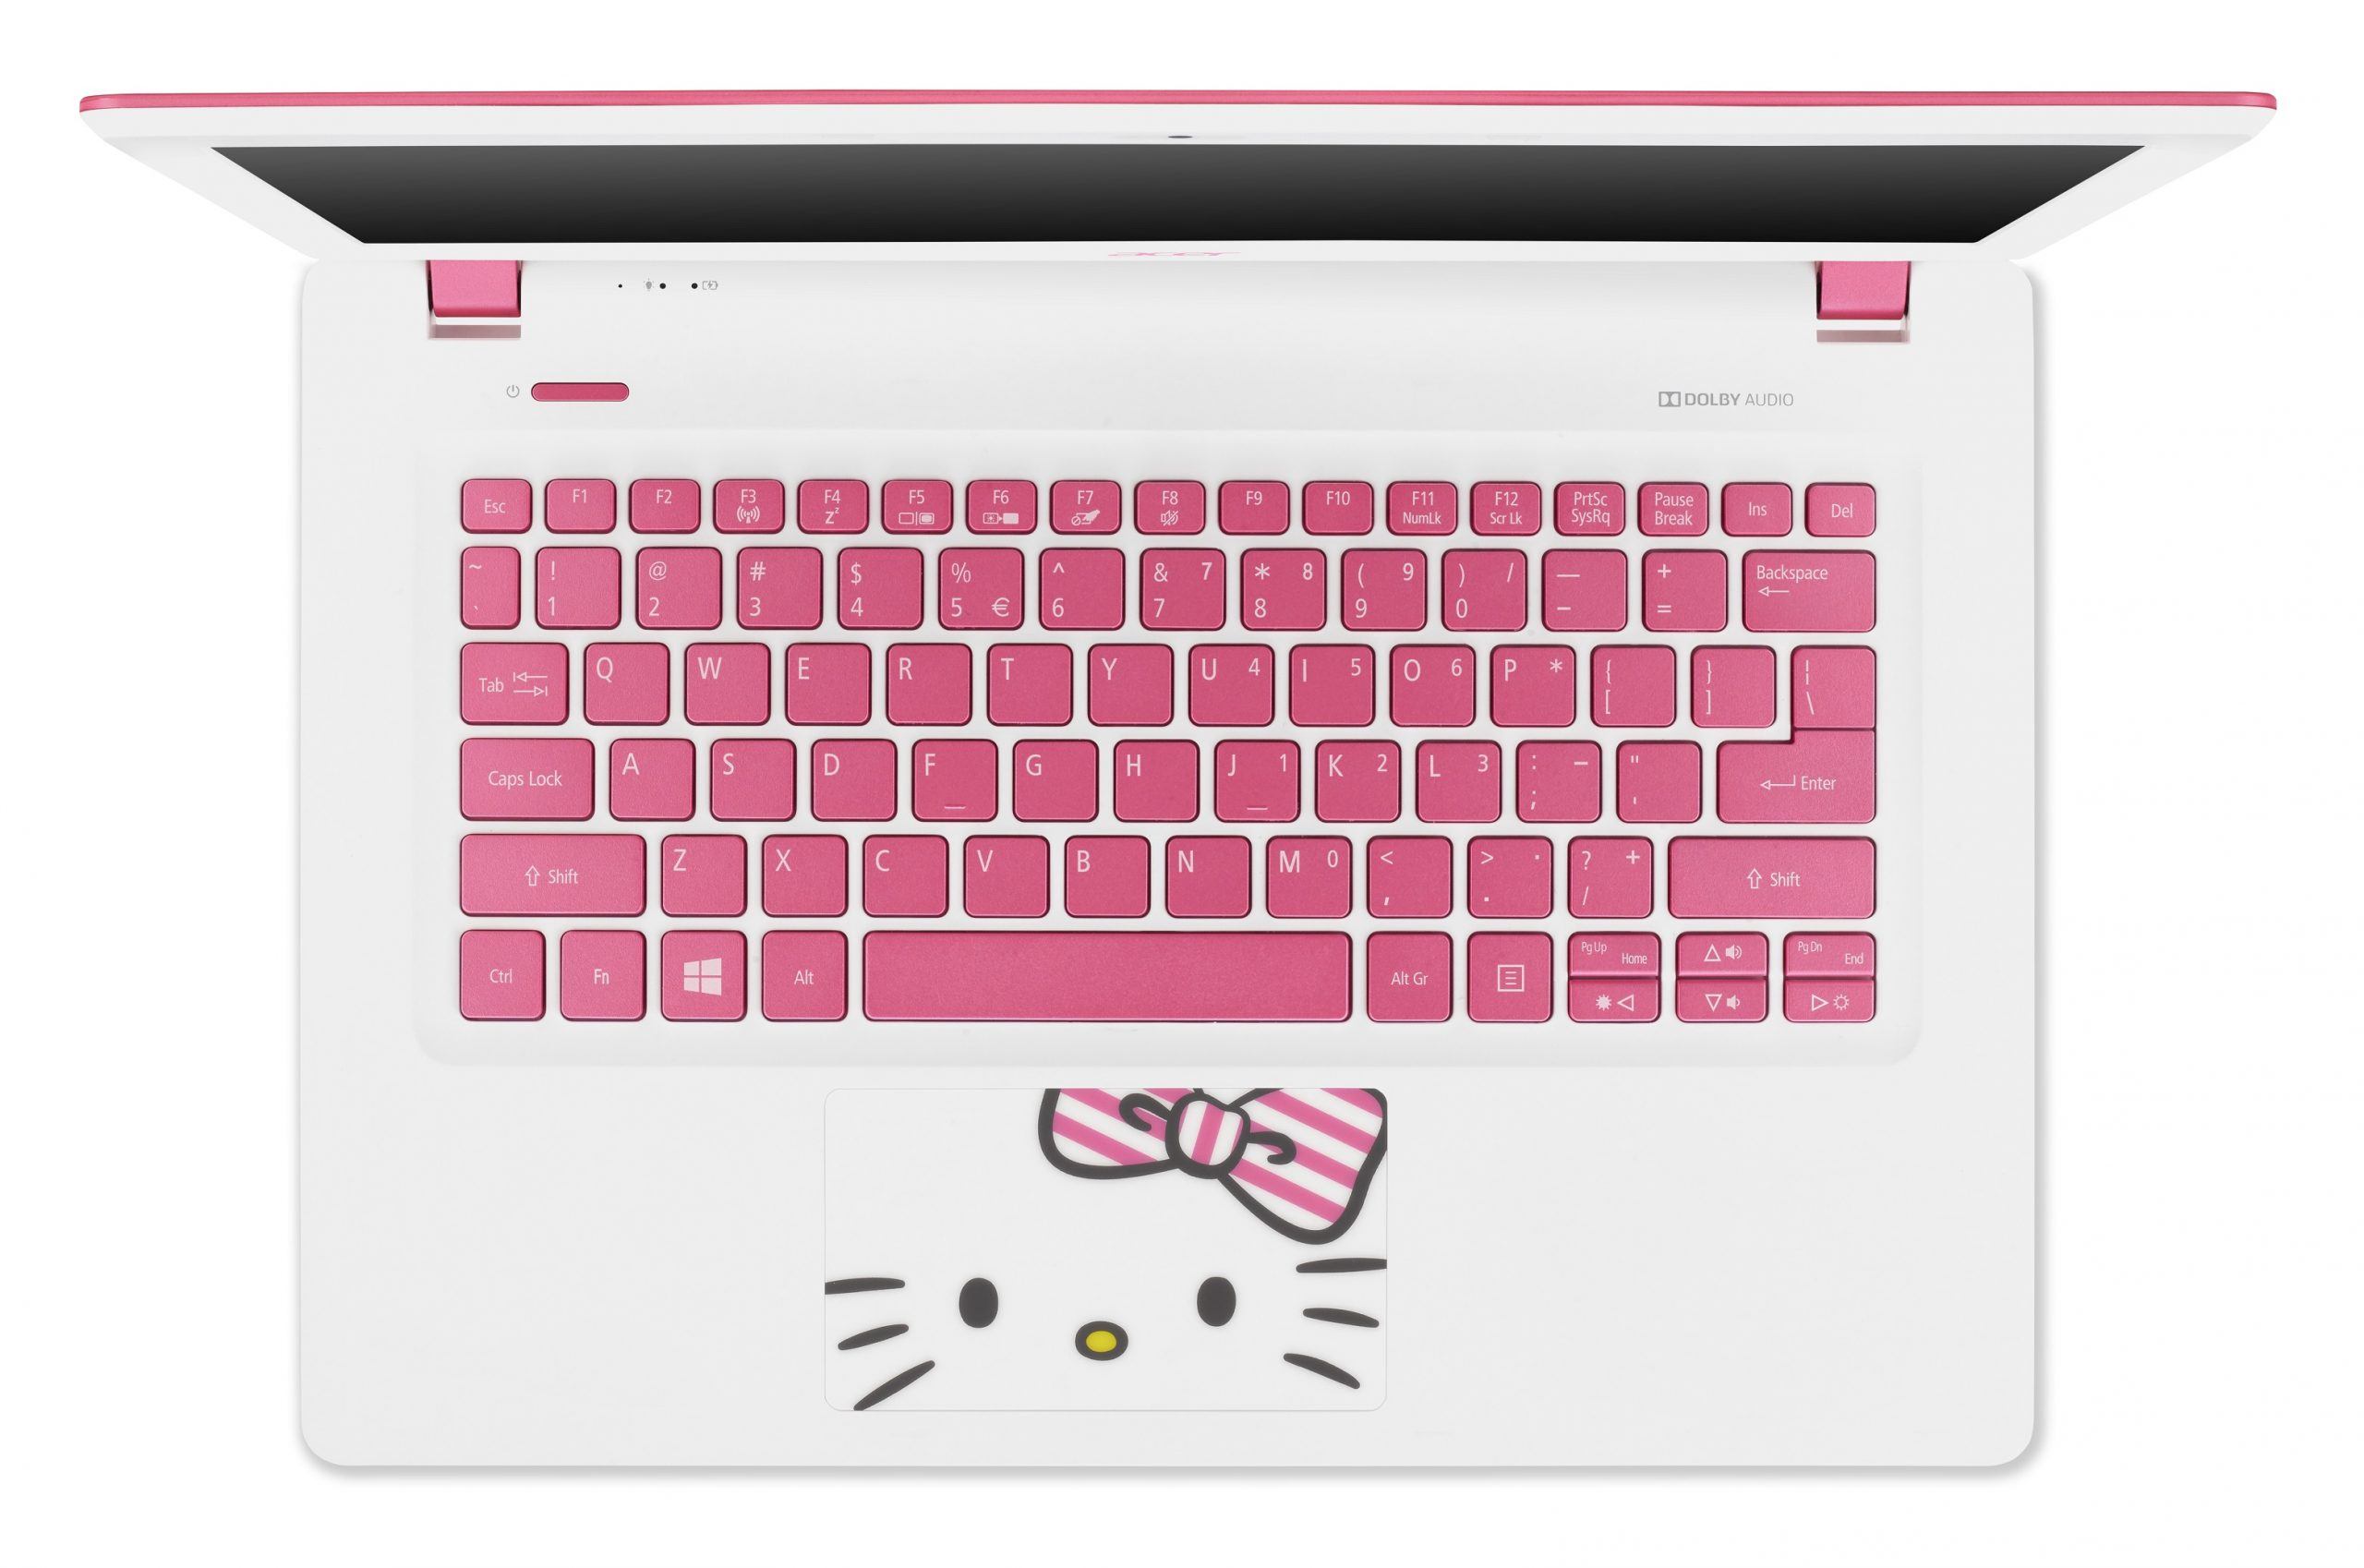 Acer Limited Edition Hello Kitty Laptop Now Available in PH